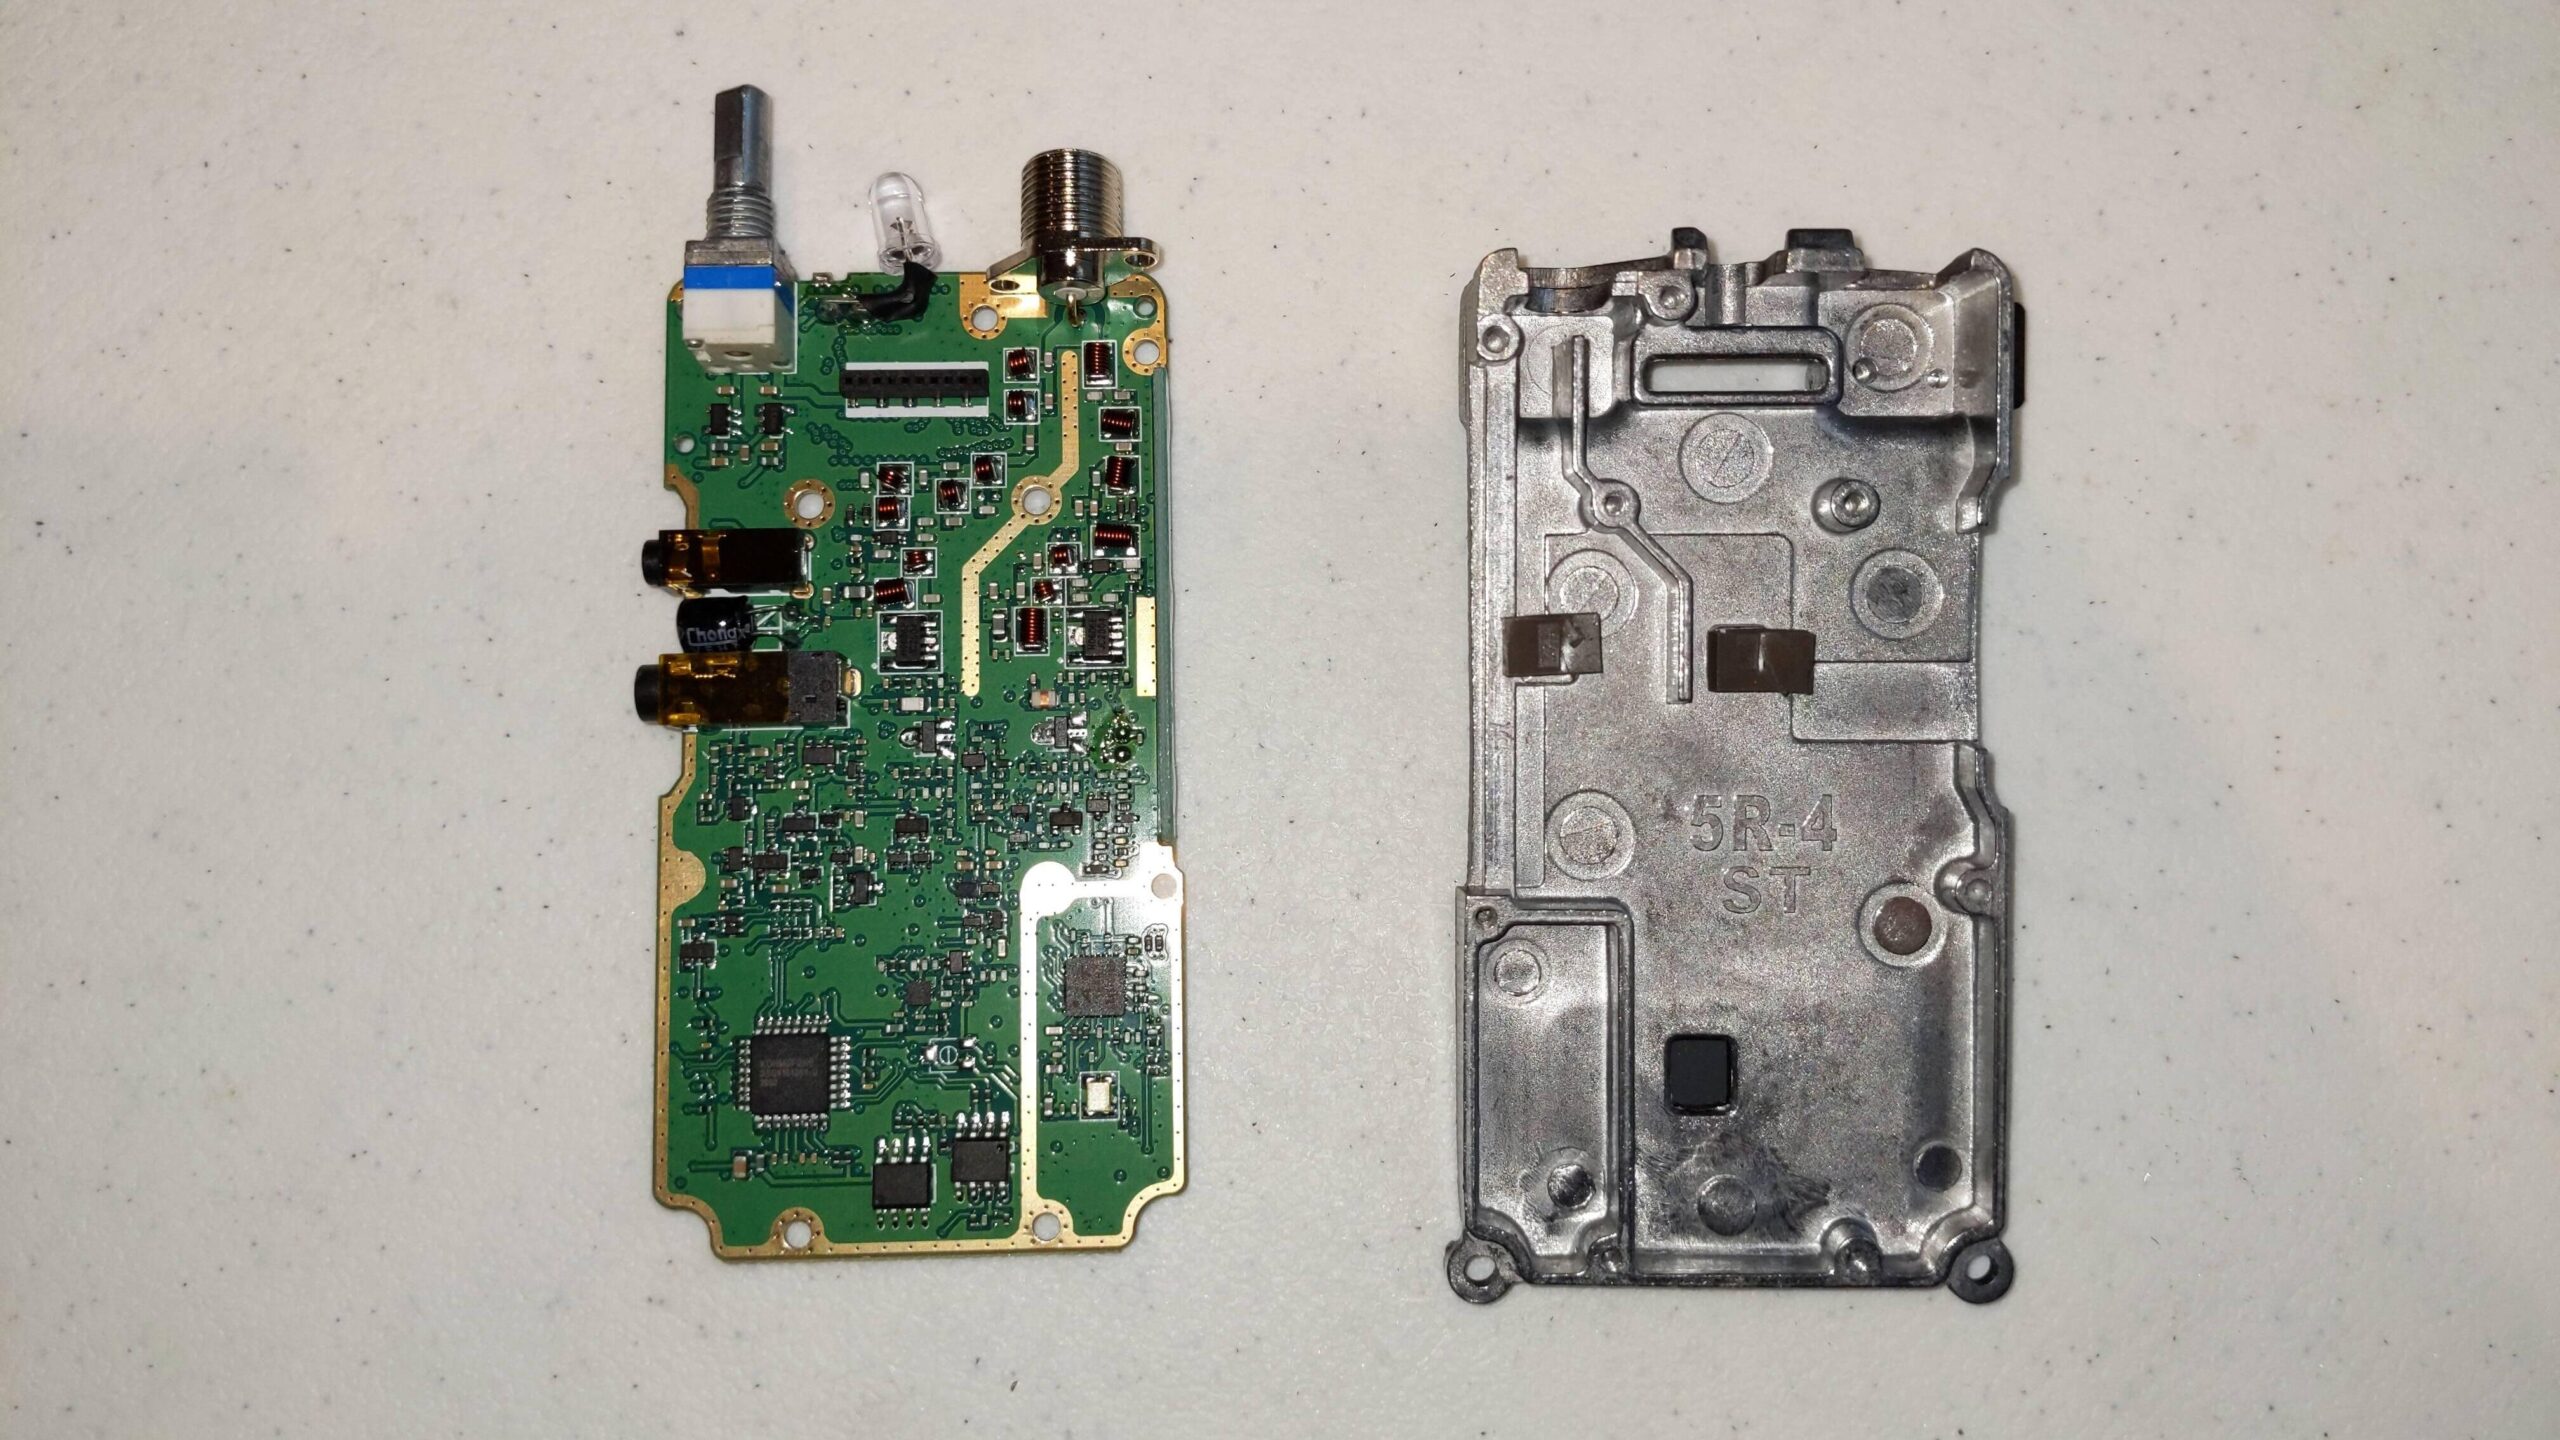 Baofeng UV5R internals, with PCB removed from backplate